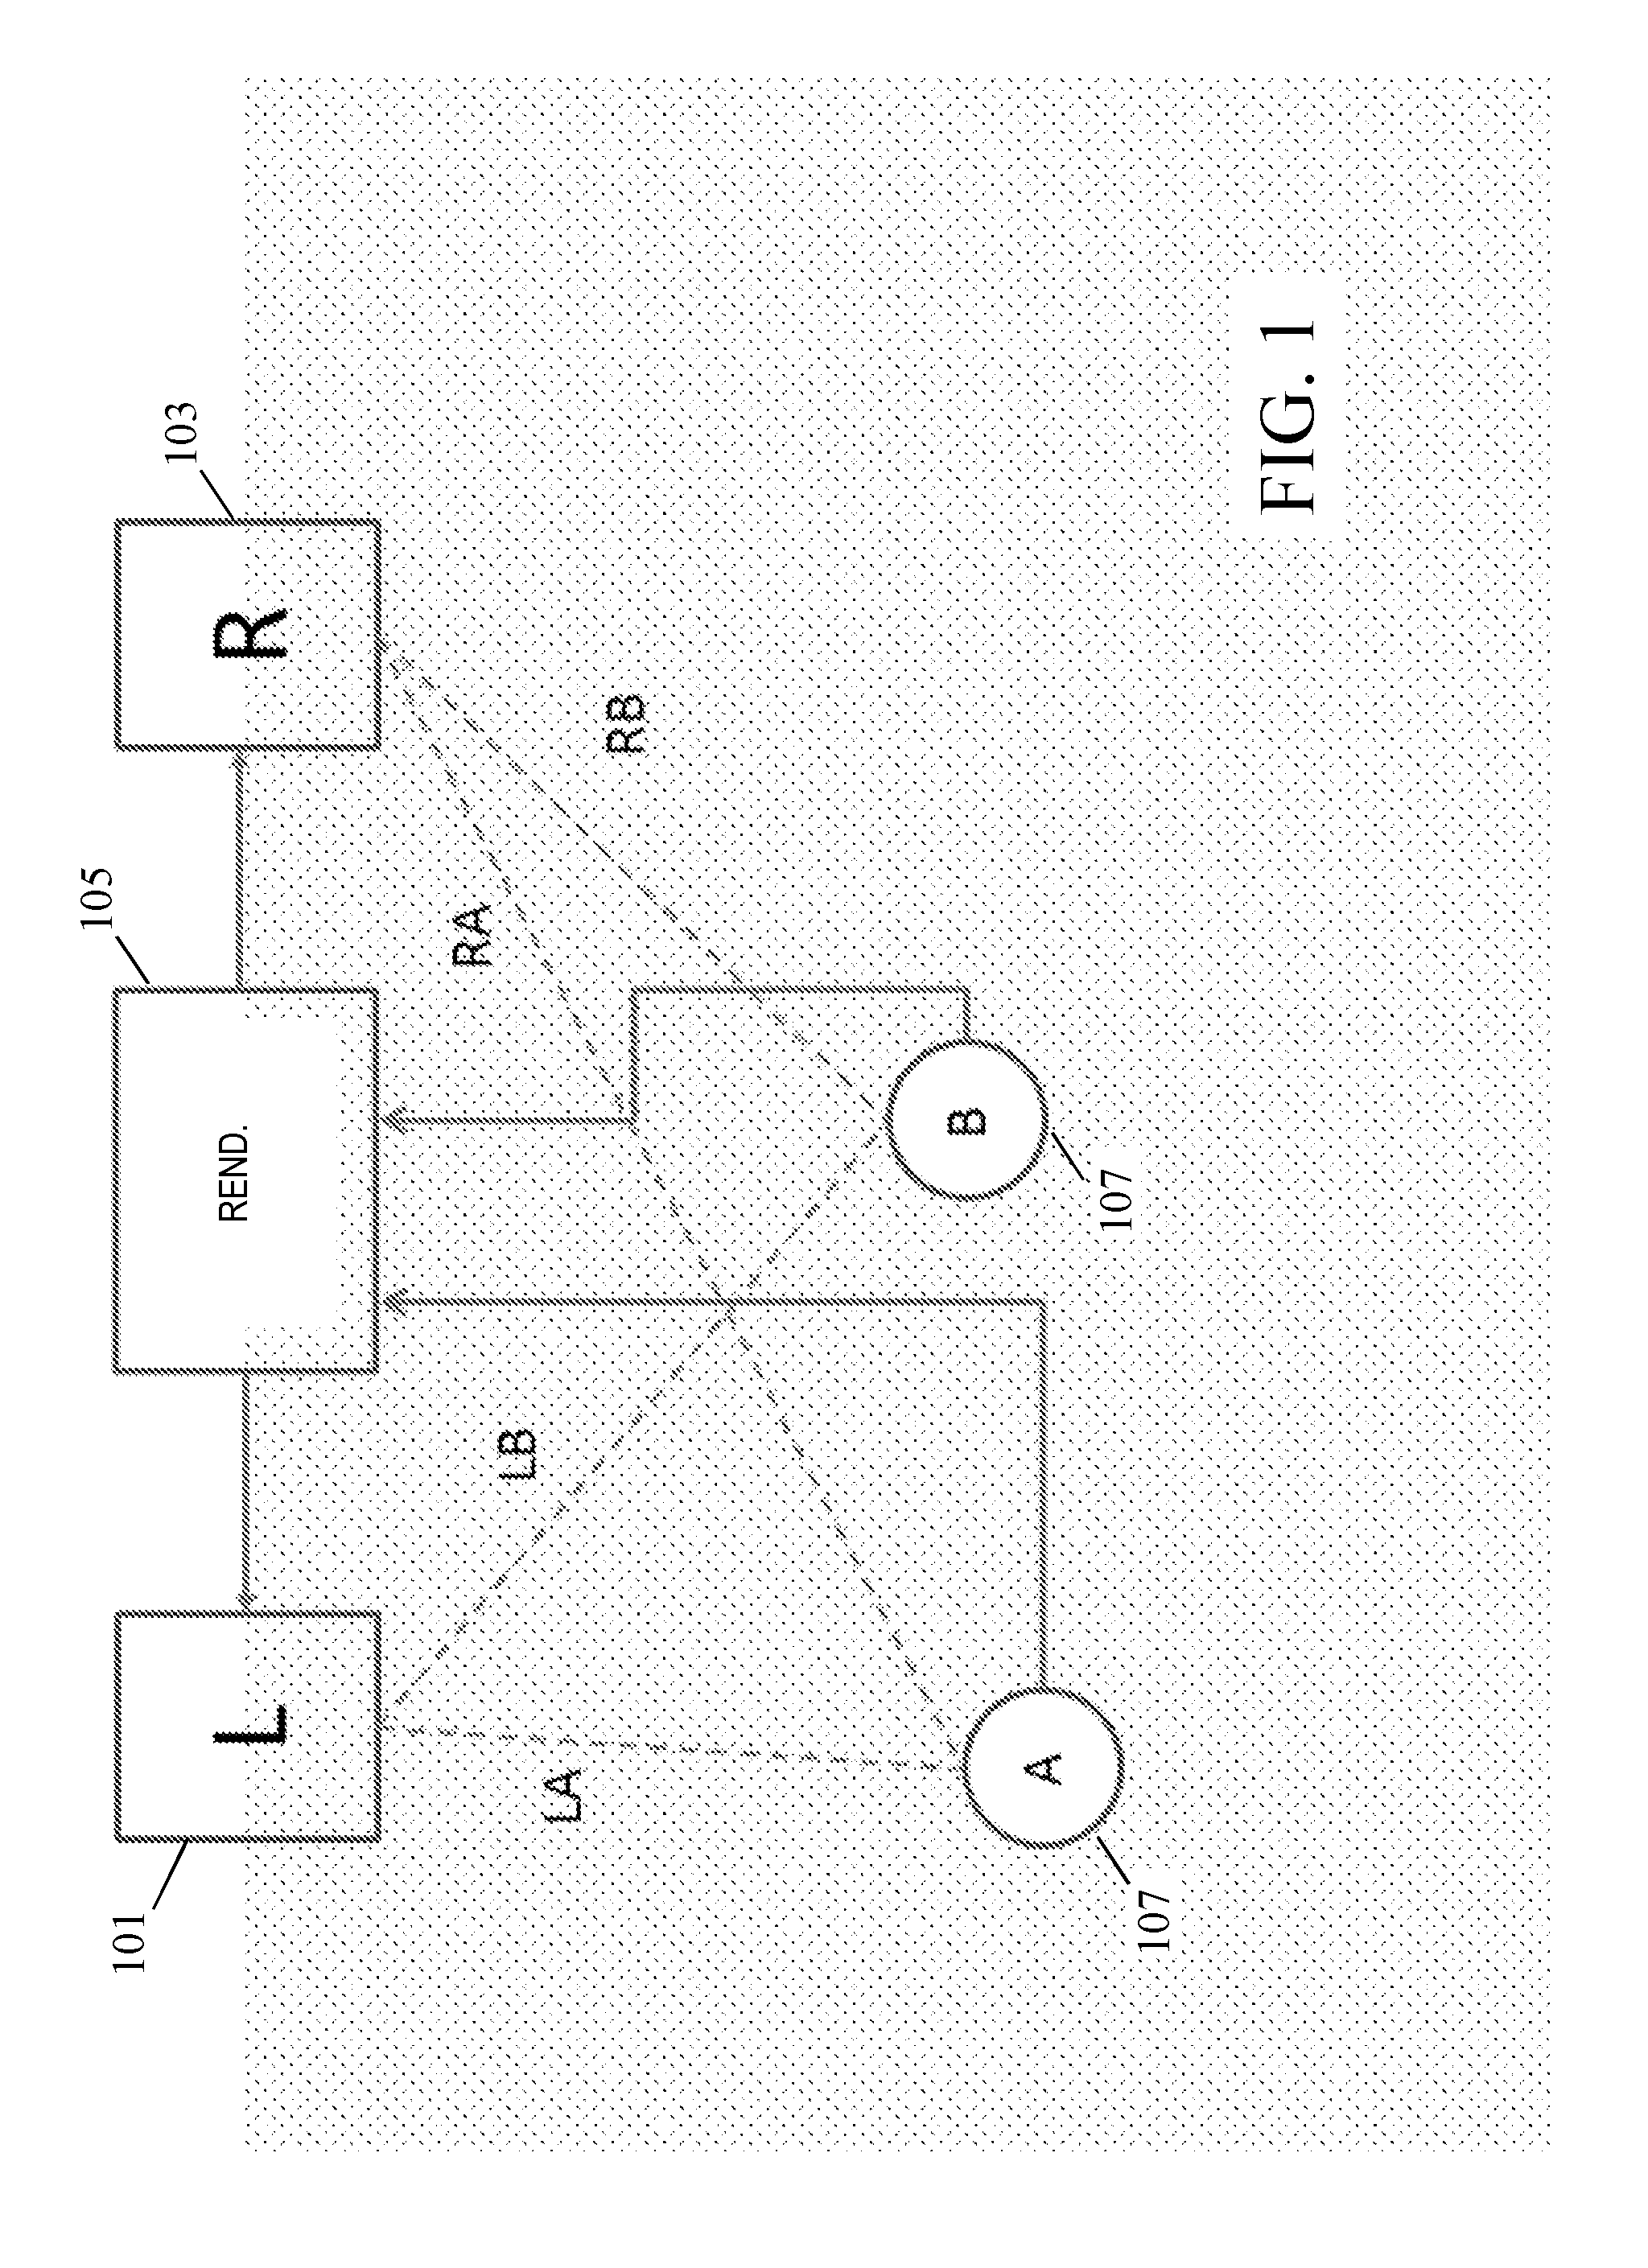 Method and apparatus for determining a position of a microphone